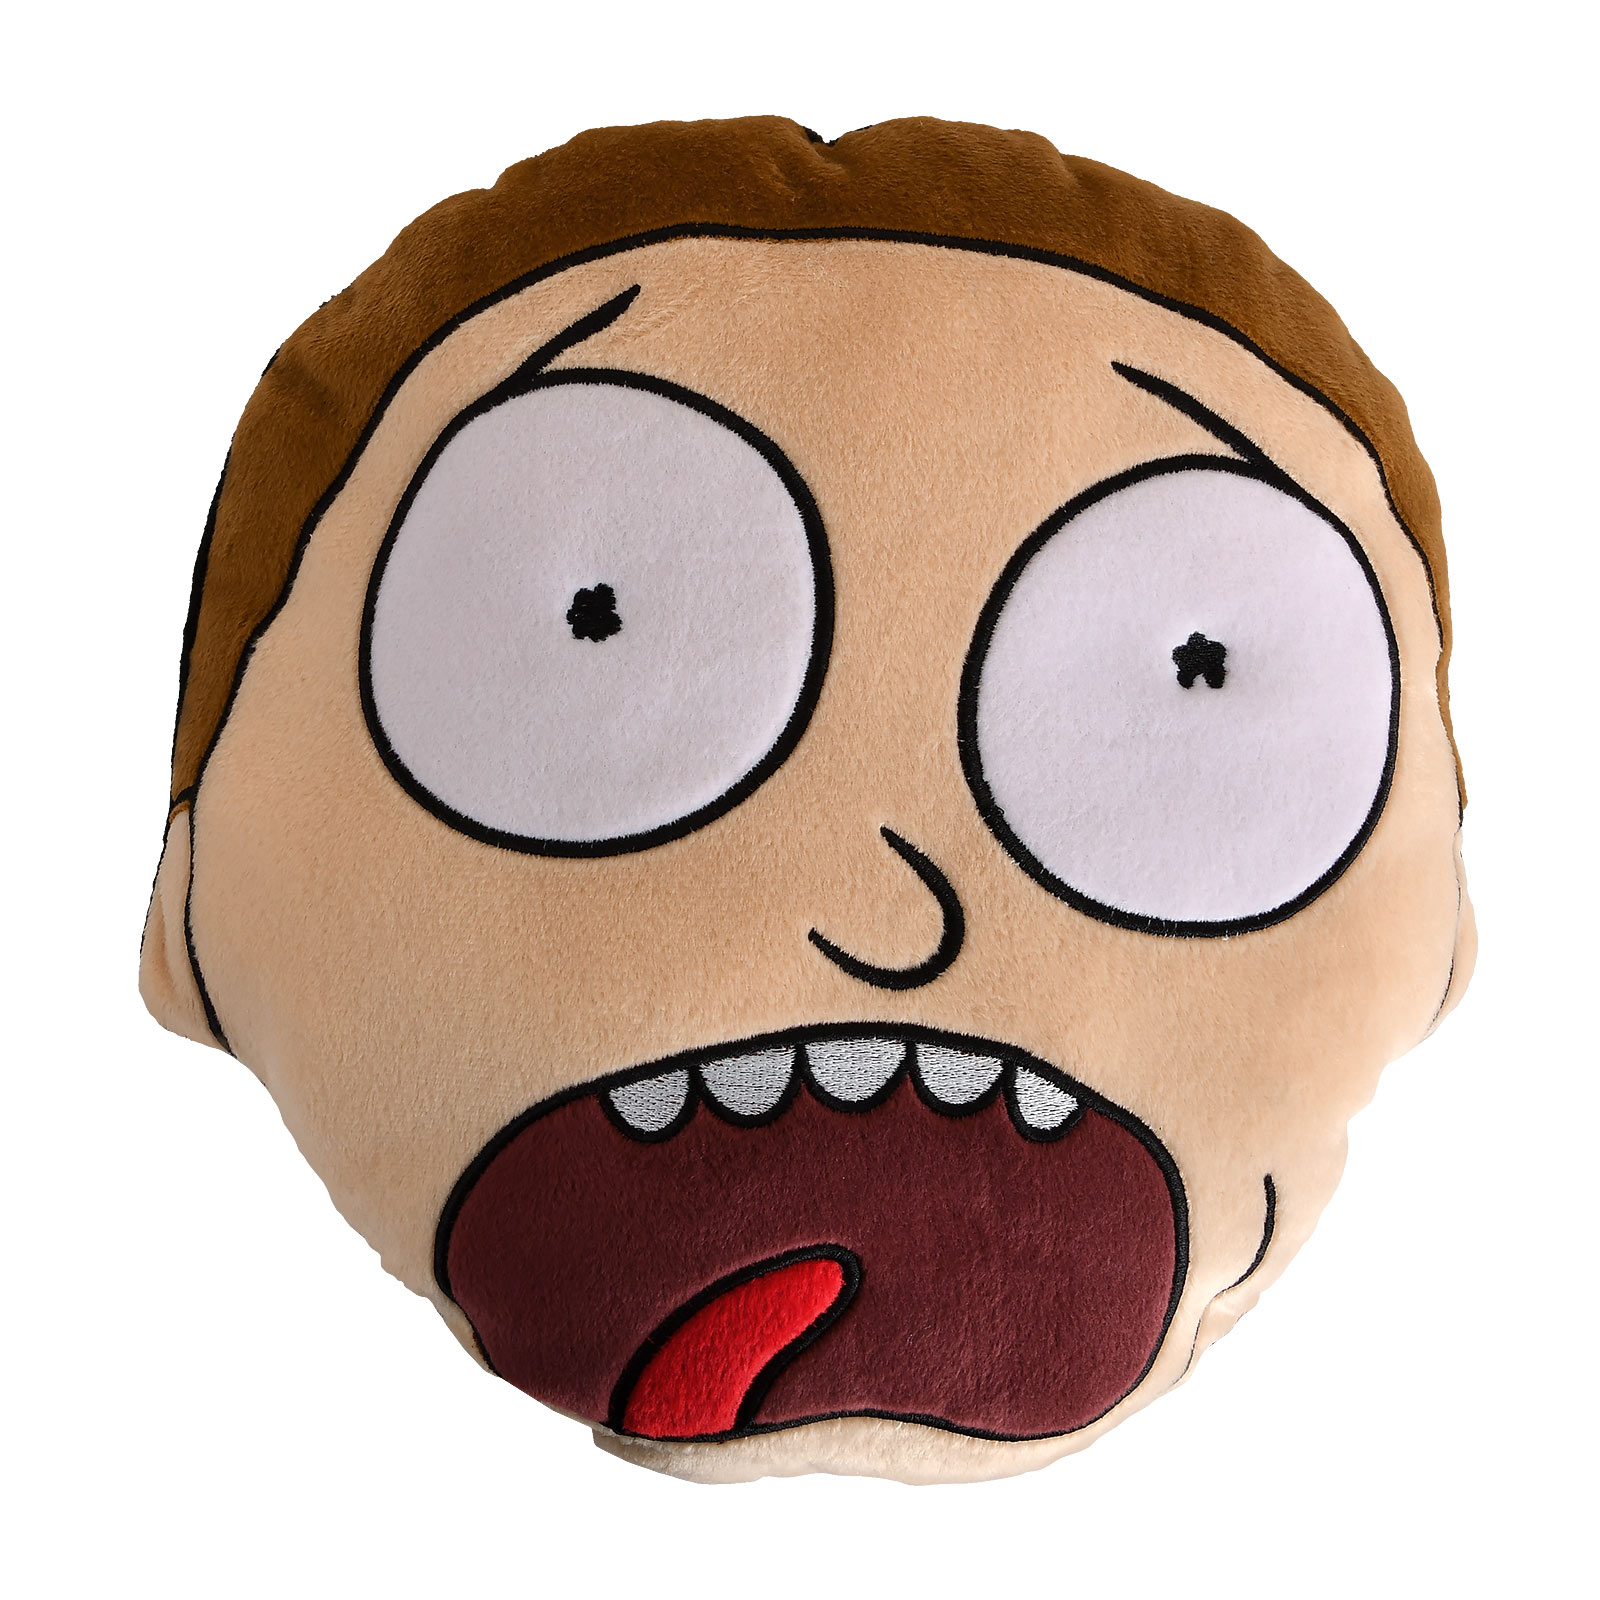 Rick and Morty - Morty Face Cushion